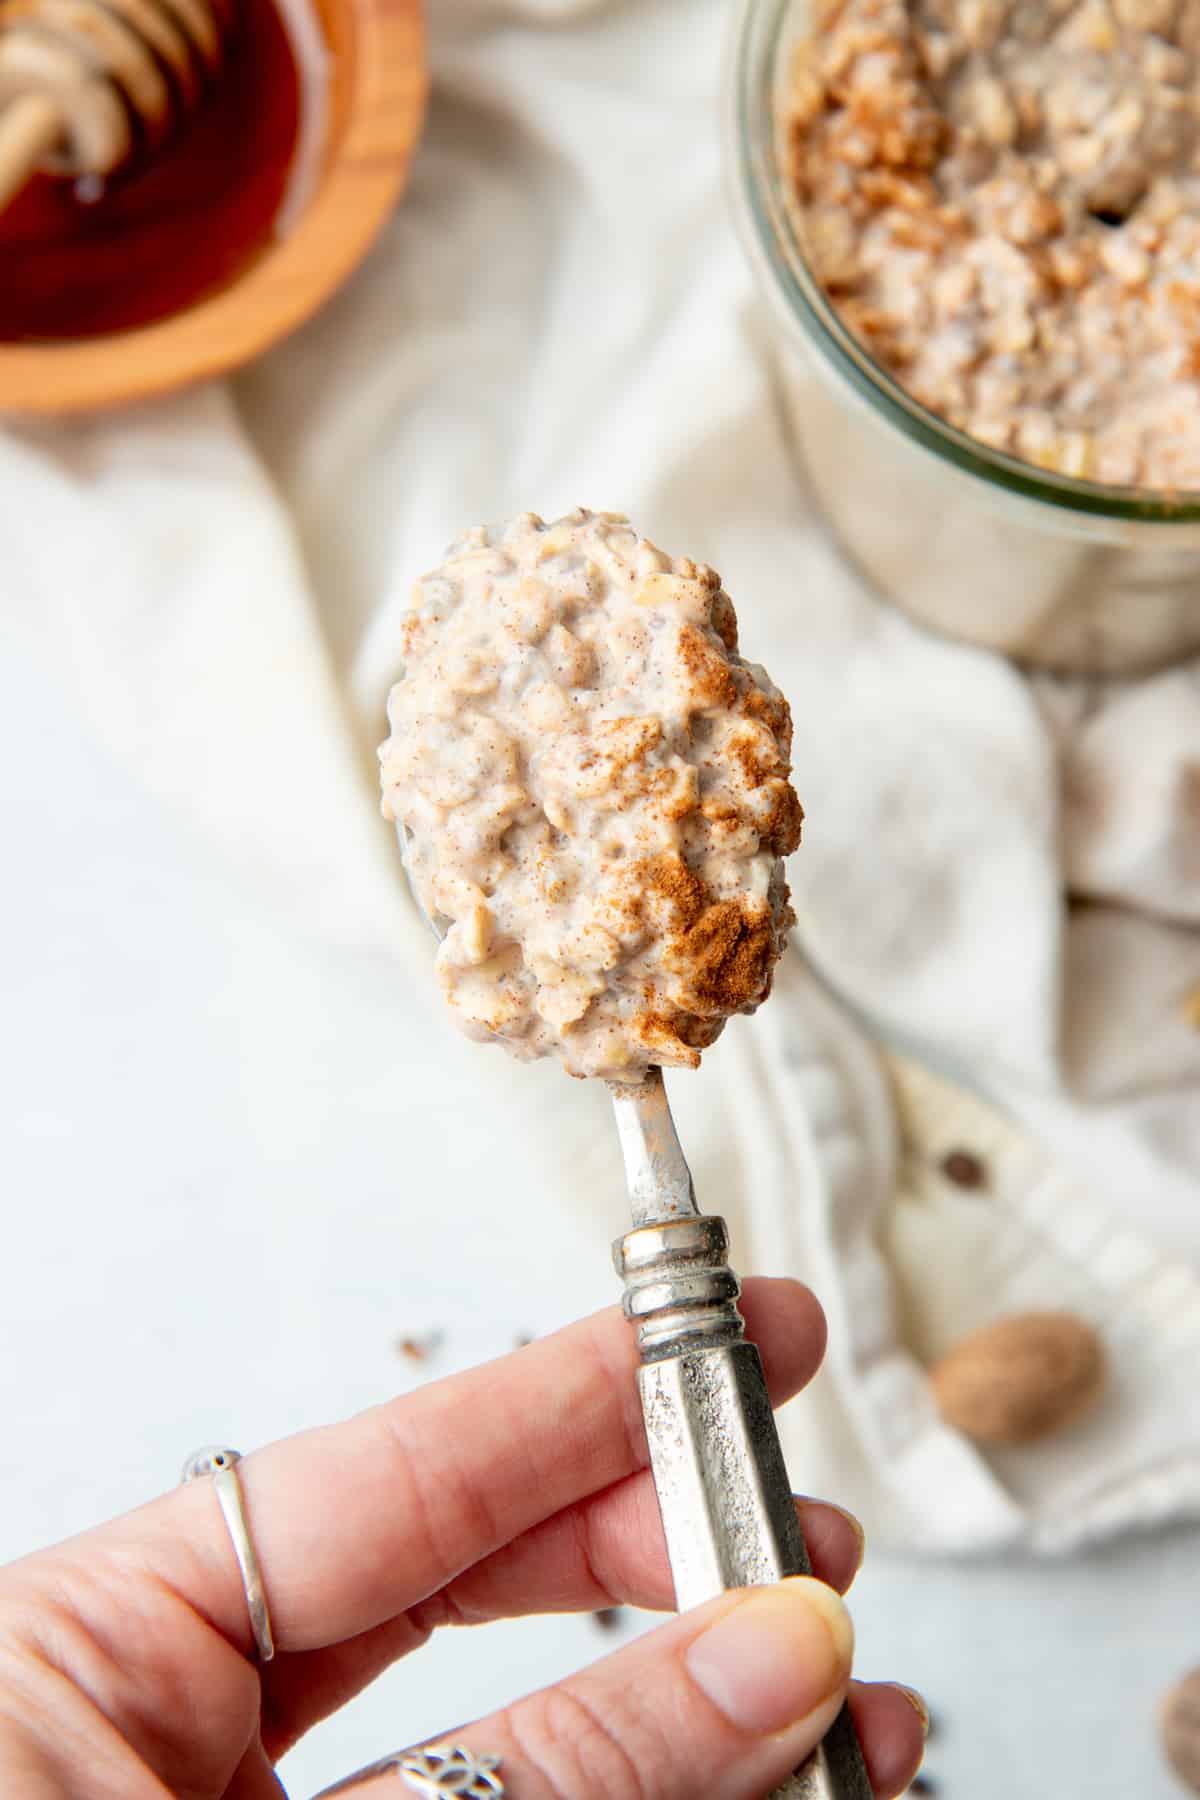 A spoon holds a bite of overnight oatmeal.